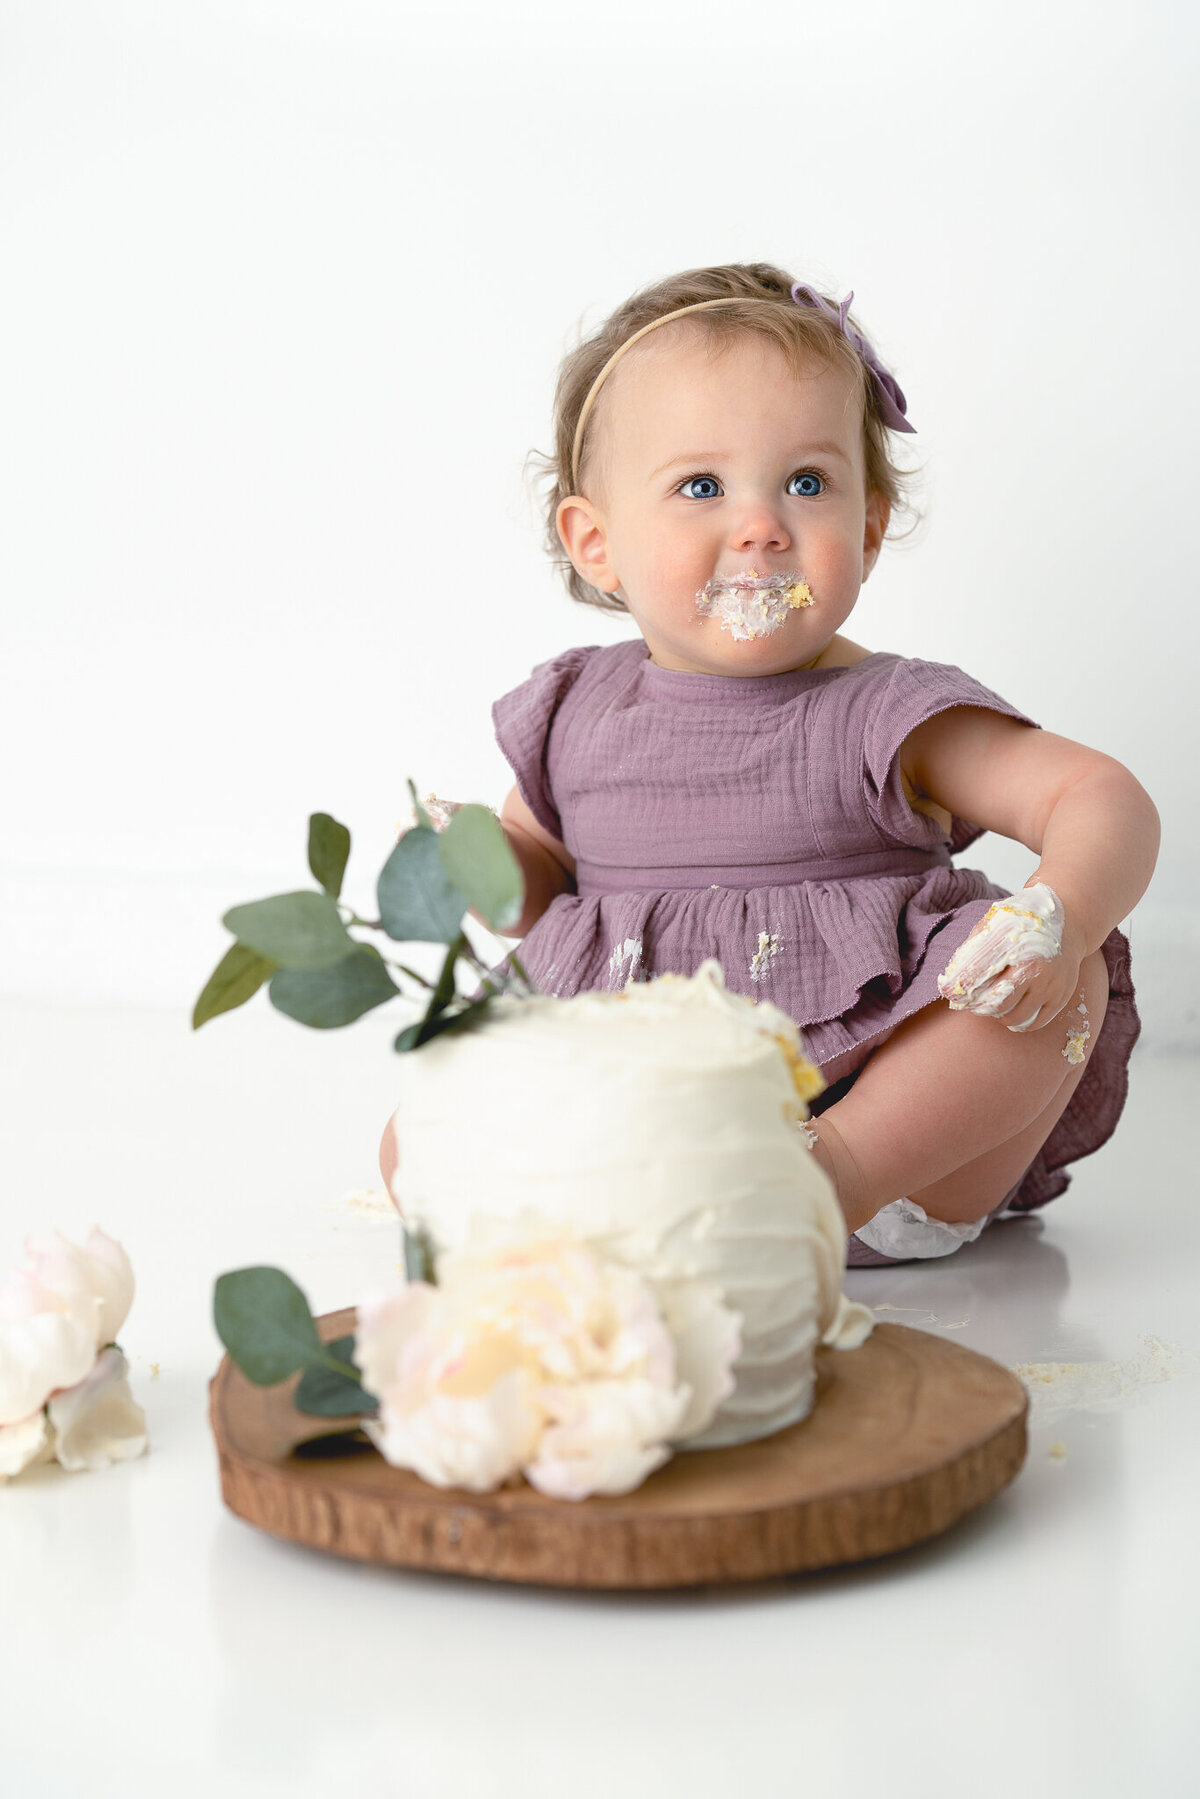 A baby girl is sitting in front of a white cake at her cake smash photography session.